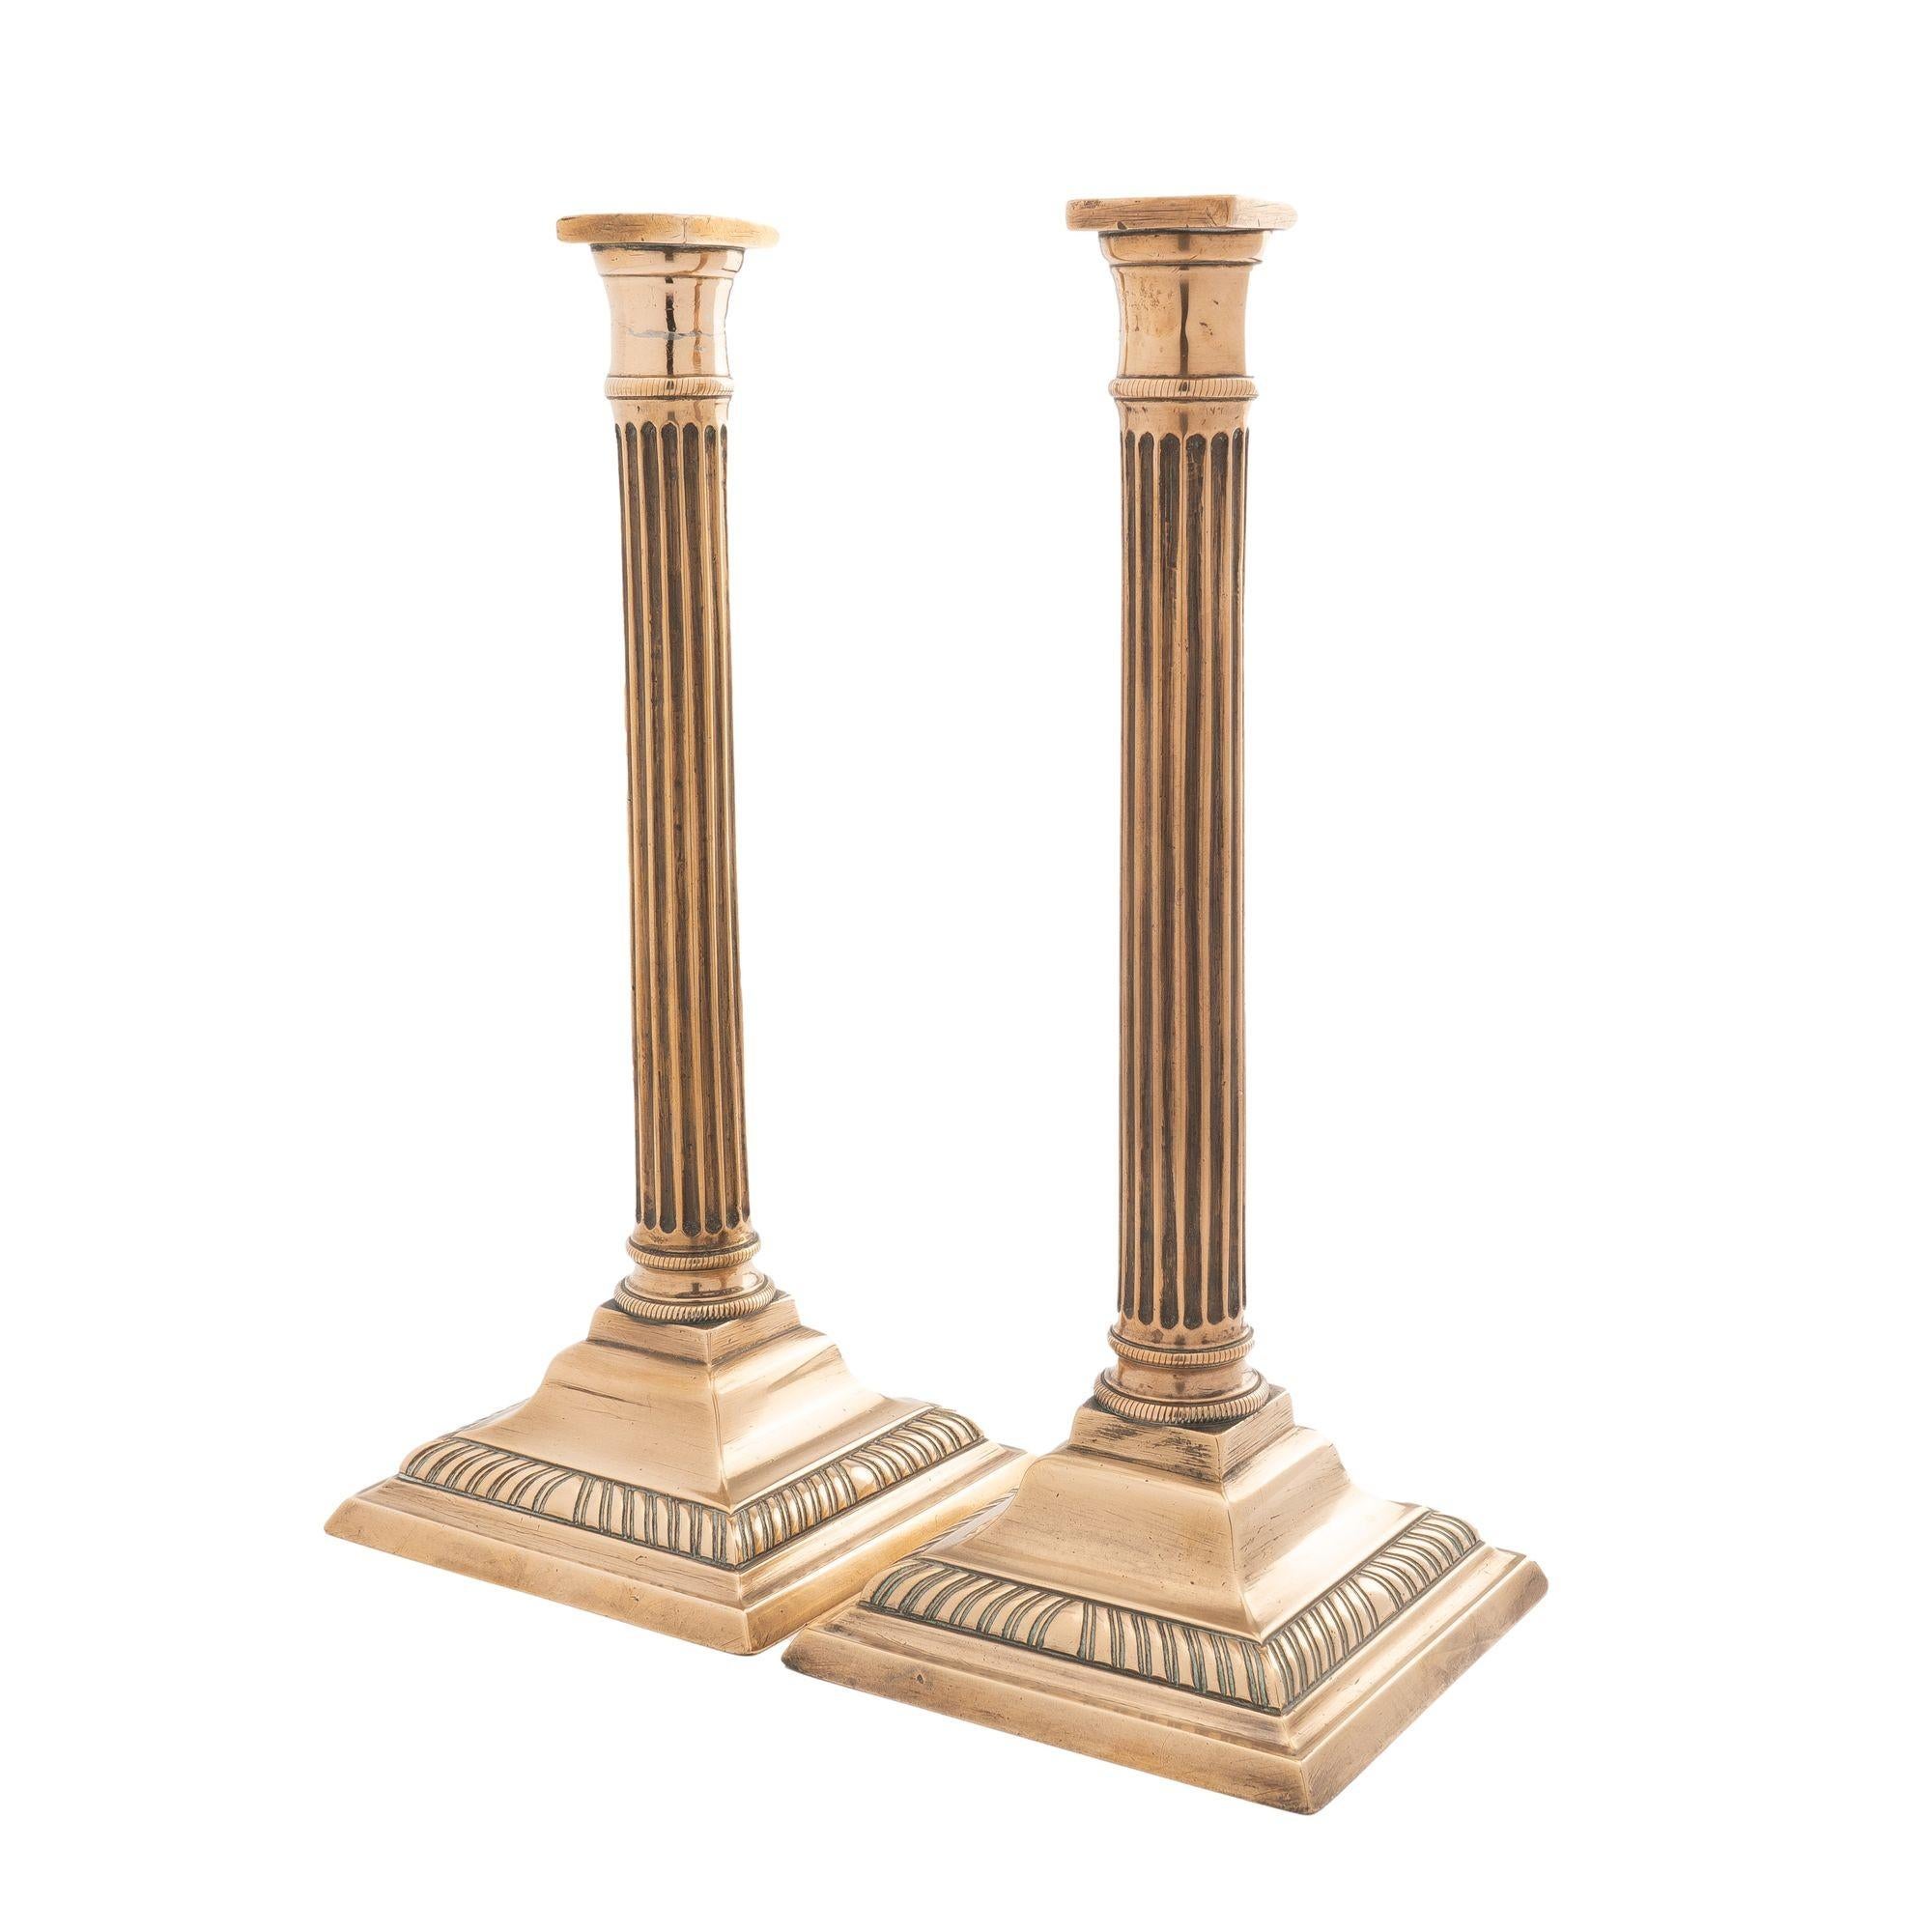 Pair of fluted columnar bell metal candlesticks on square stepped base with a gadroon molding. The hollow core cast candle shaft is peened to the square cast brass base. The fluted shaft incorporates a slightly concave circular candle cup with a